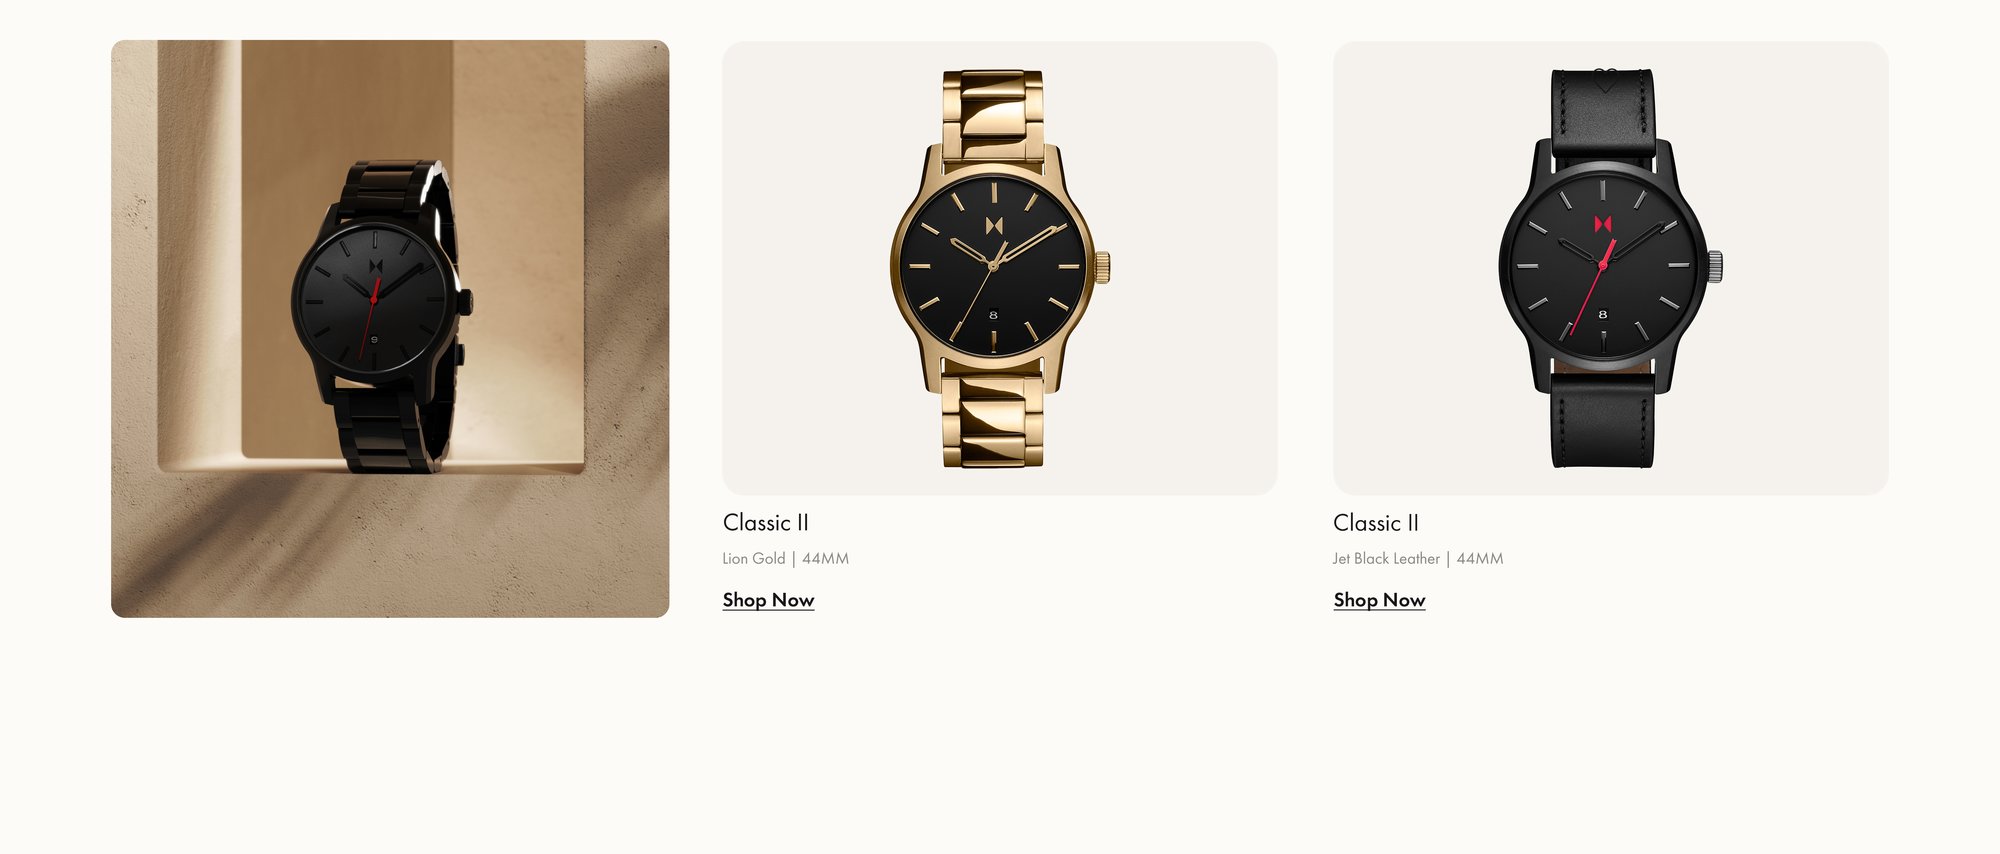 MVMT Classic II Watches in Lion Gold and Jet Black Leather